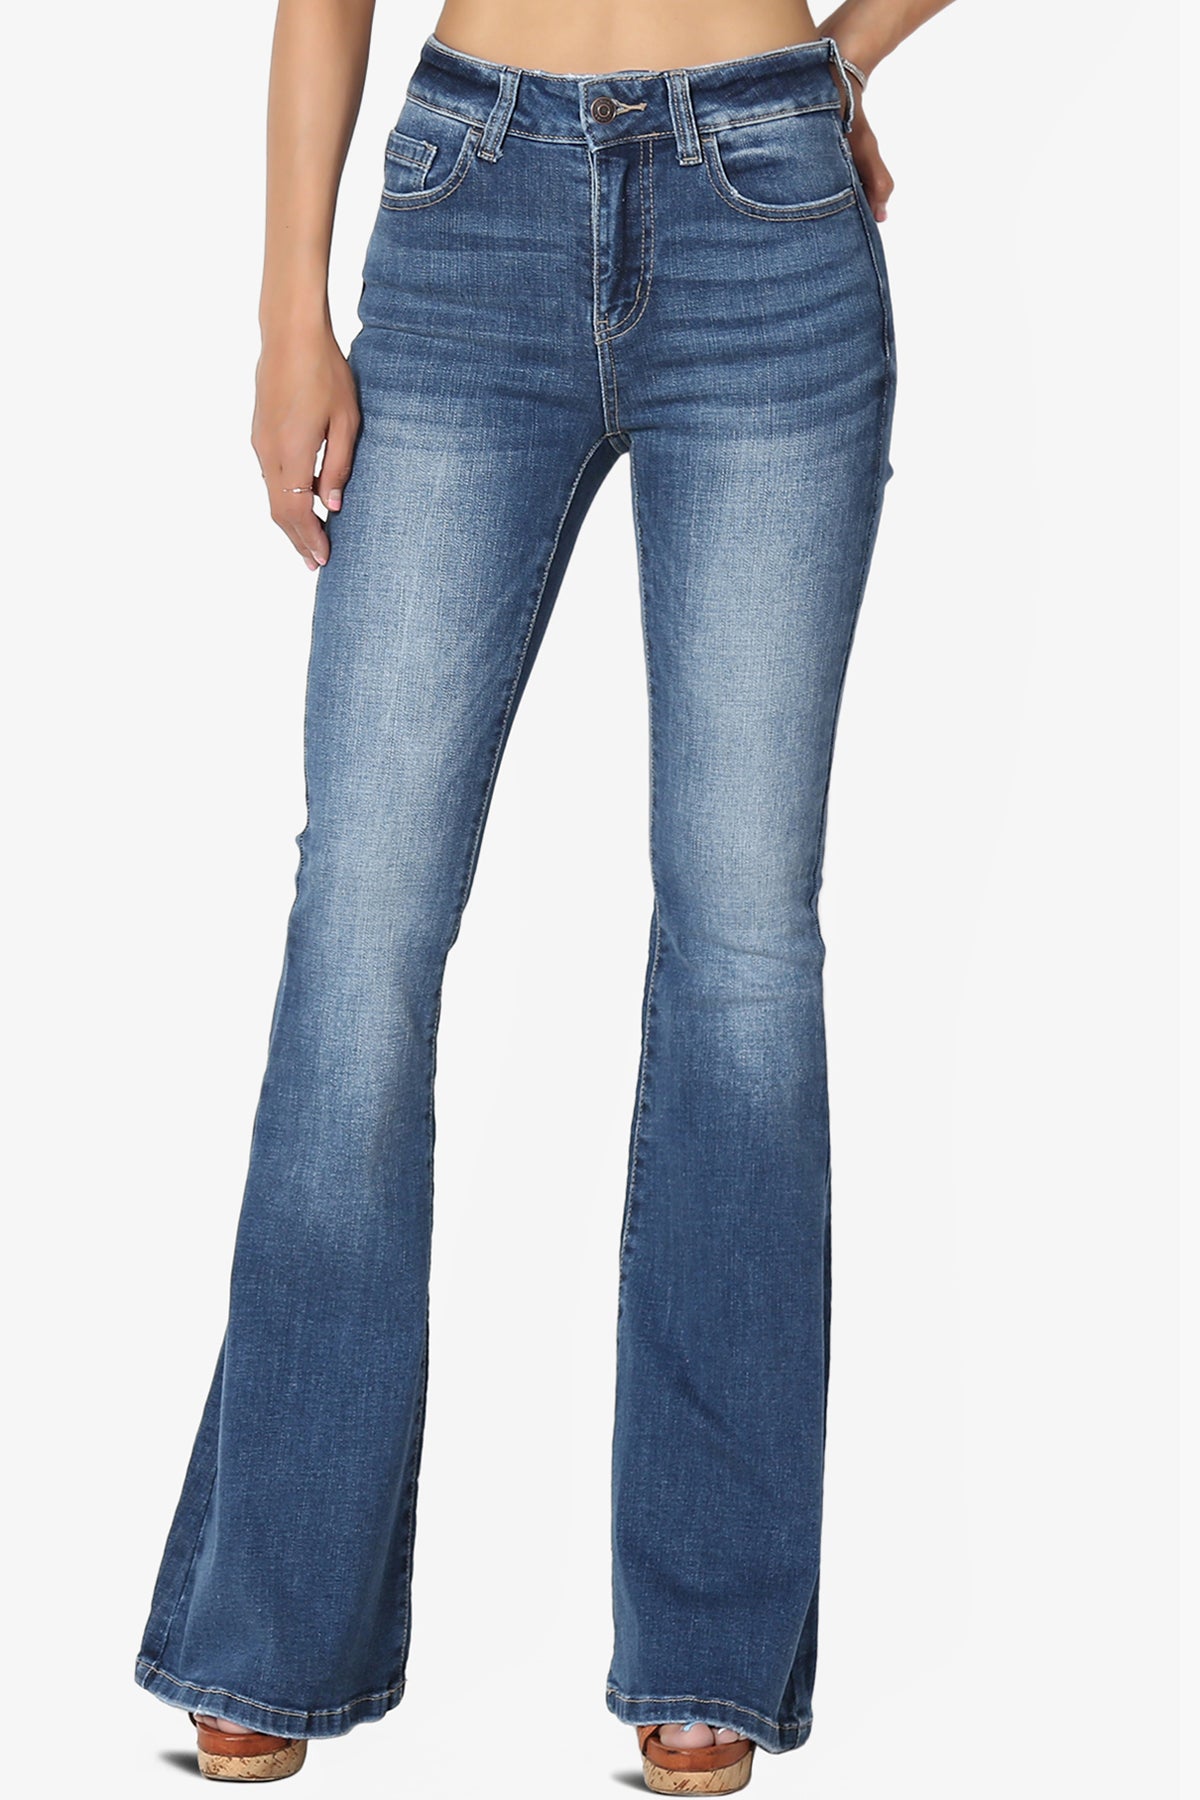 Pastry Washed High Rise Flared Jeans in Dark